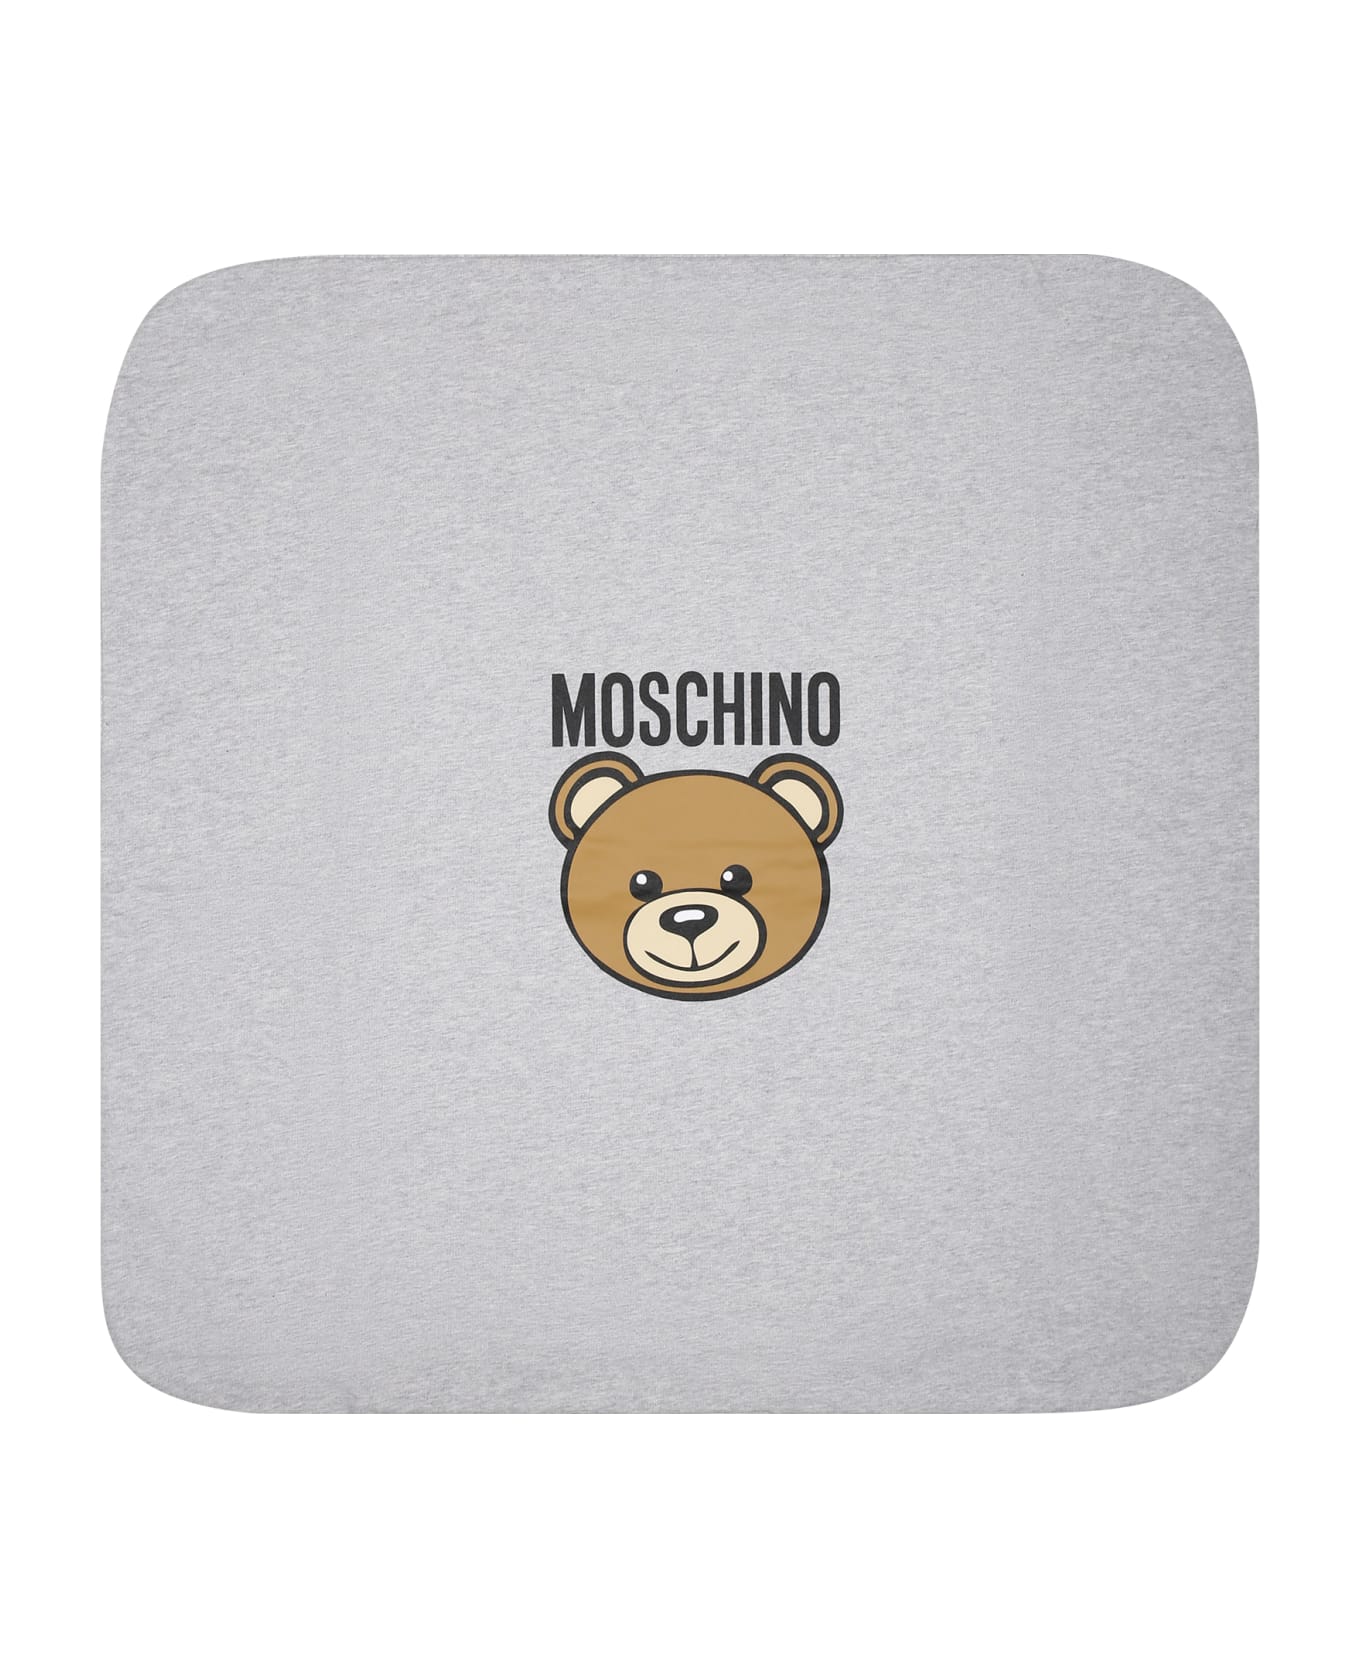 Moschino Gray Babies Blanket With Teddy Bear And Logo - Grey アクセサリー＆ギフト